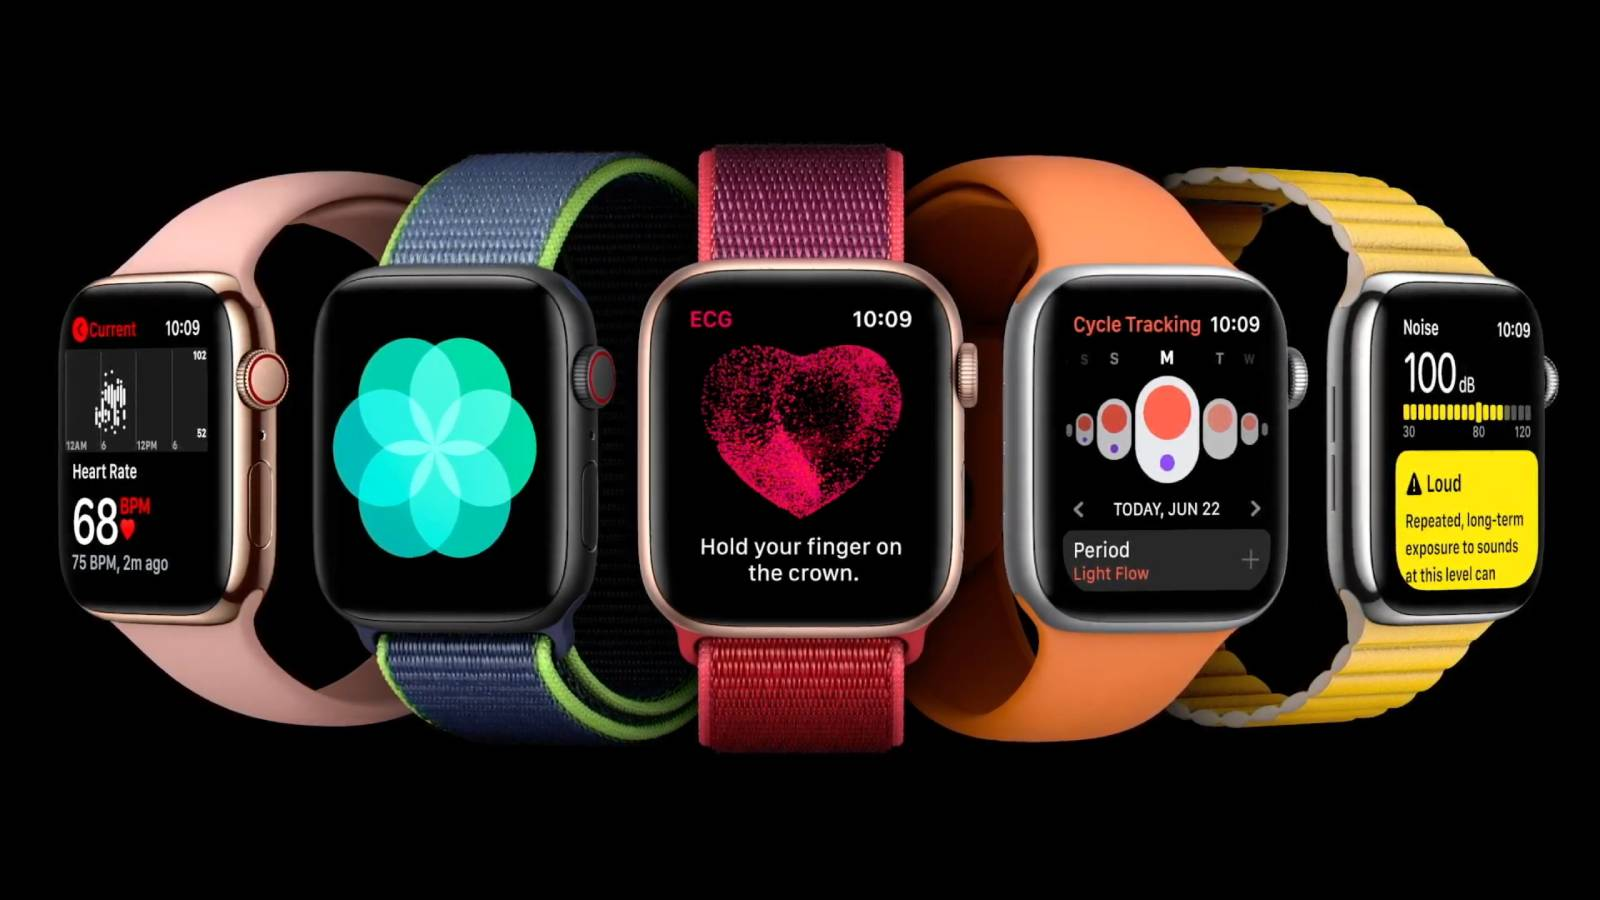 Apple Watch 7: Price, Release Date, How to Buy and More